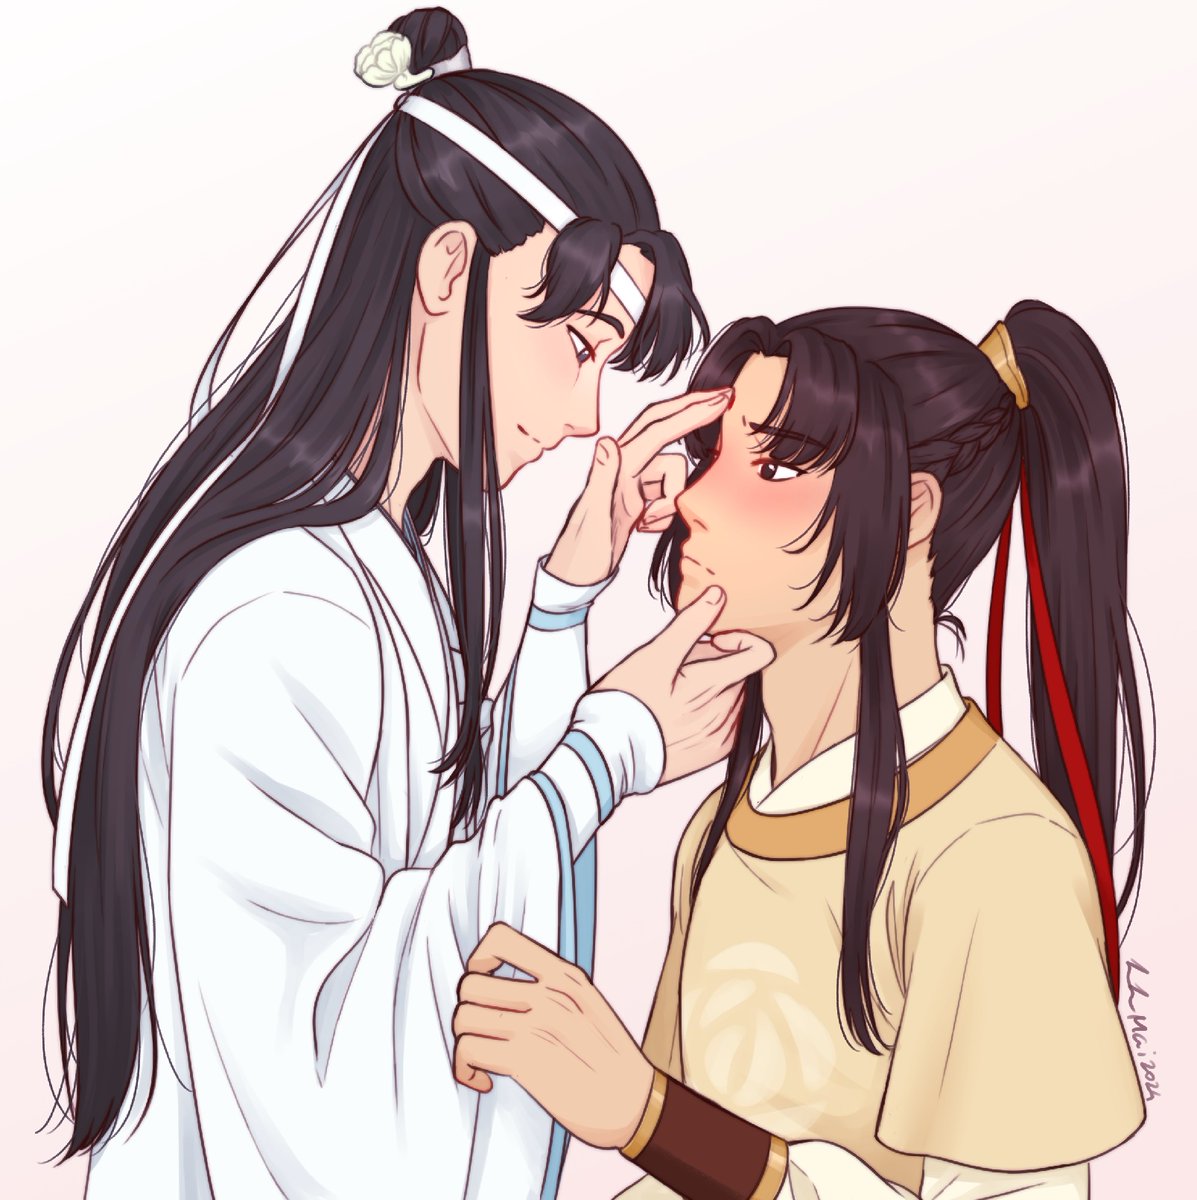 My latest comm from @kunogi 💙💛
It's my boys again~ They're so tender and sweet. And Lan Sizhui is so caring for his beloved 💞
pose based off my fanfic: archiveofourown.org/works/49389391…
#MDZS #commission #ZhuiLing #LanSizhui #JinLing